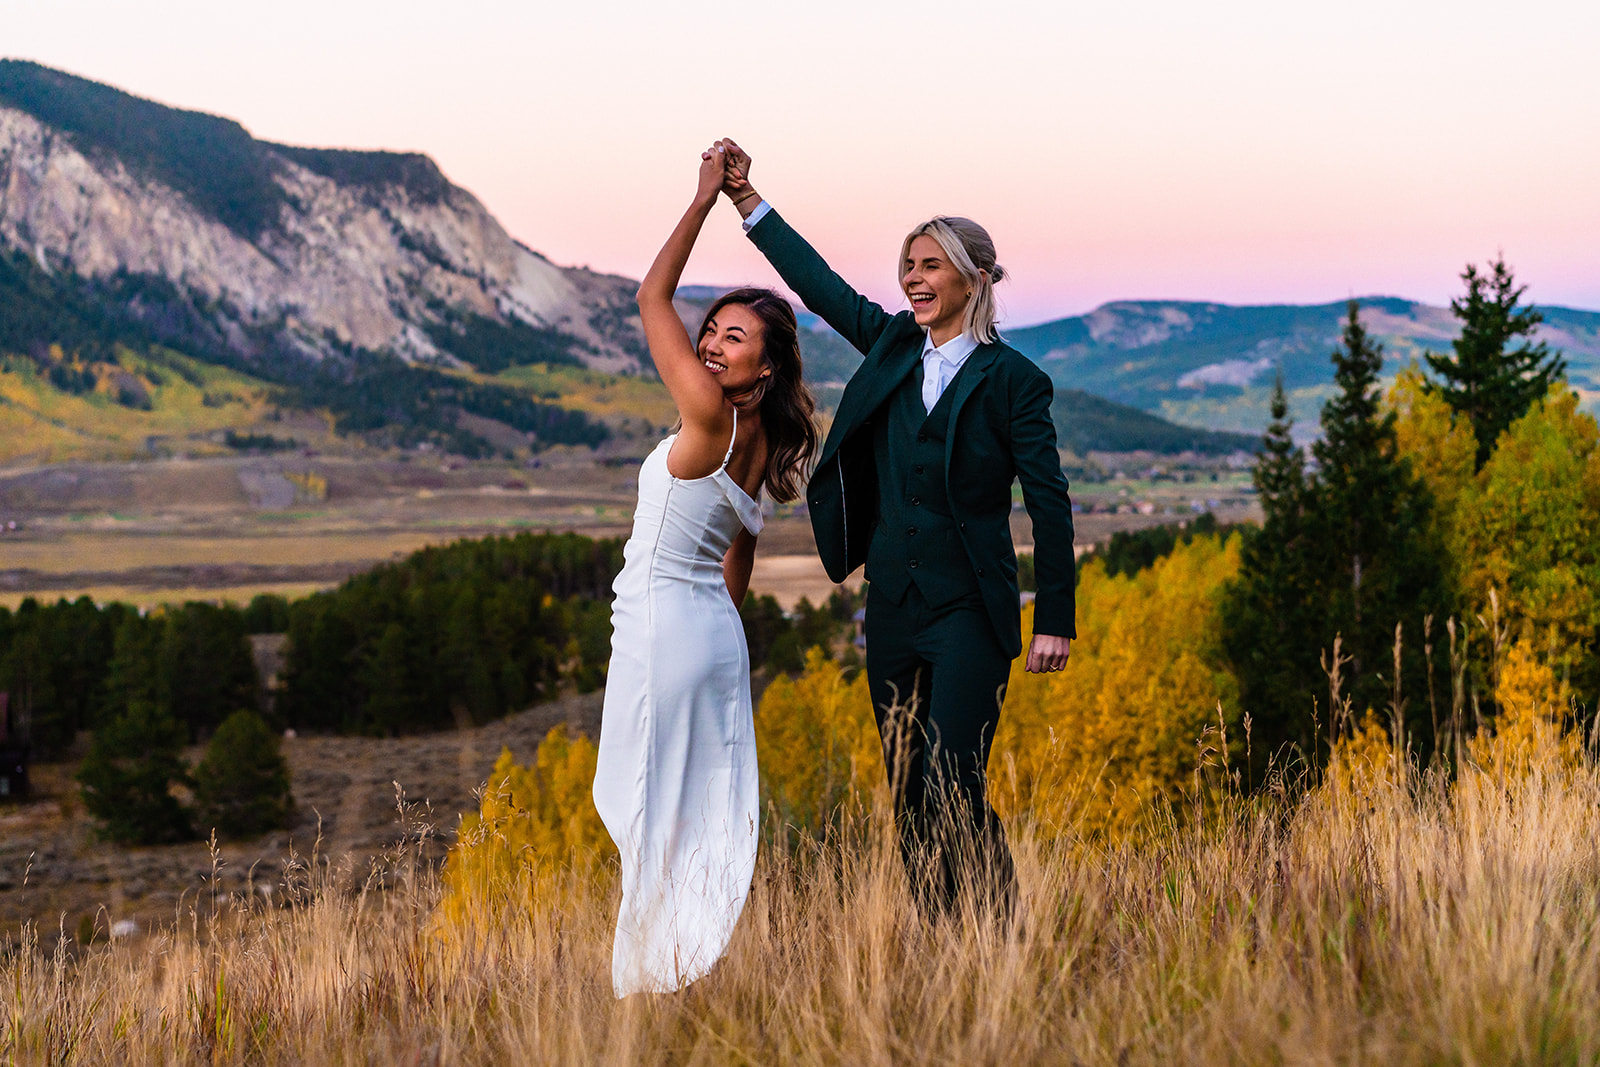 Lesbian Bridal Portraits at Crested Butte in Colorado